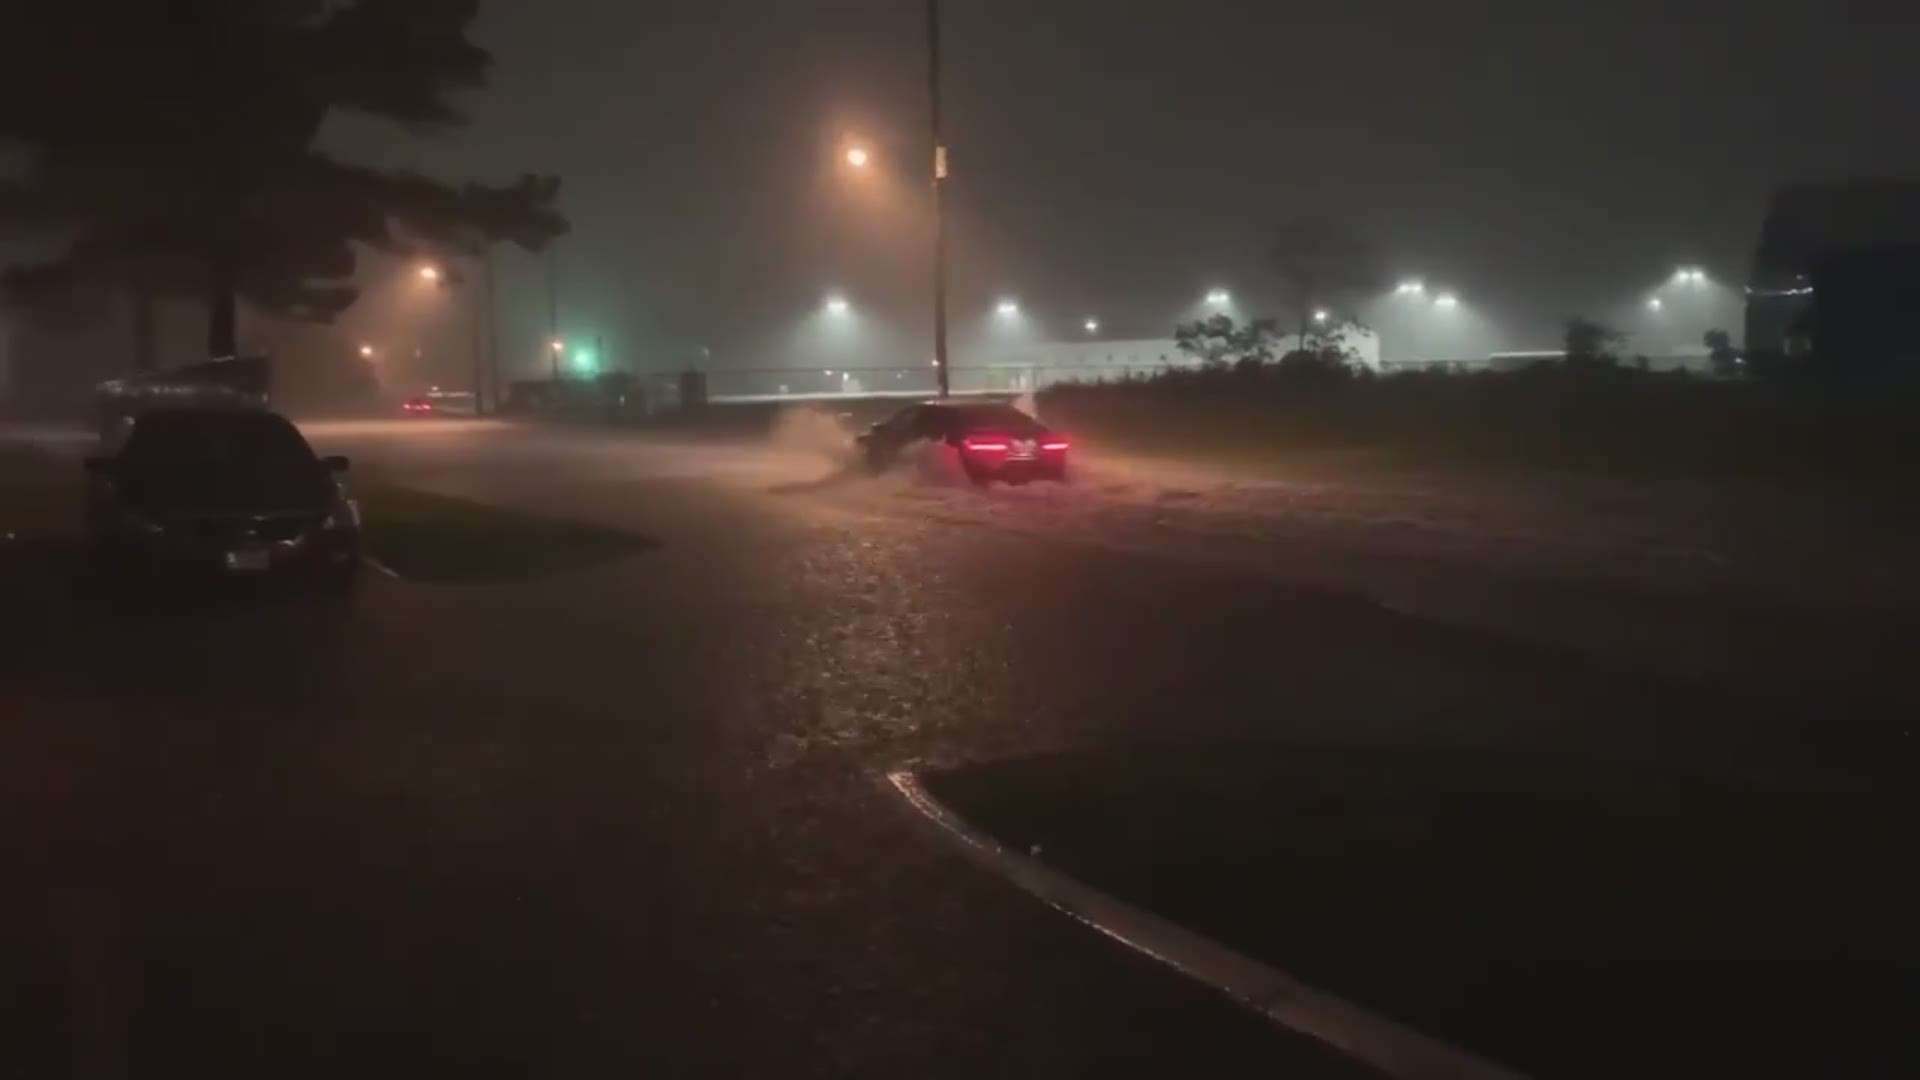 12News producer shot this video at about 8:30 p.m. on 9/18 at Park North Drive in Beaumont.